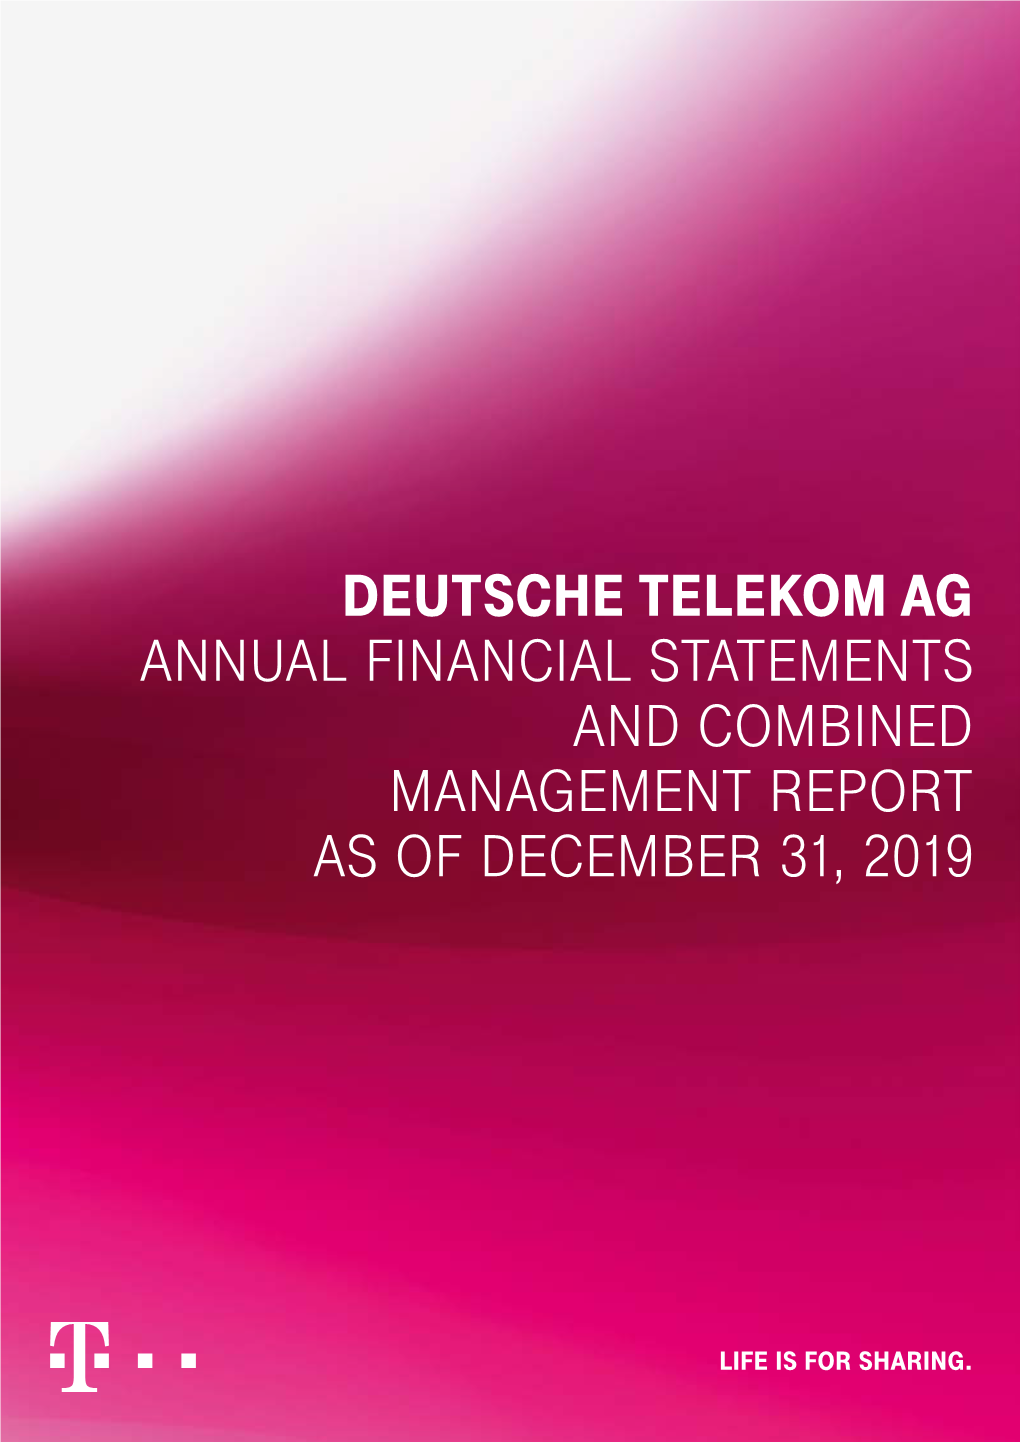 Deutsche Telekom Ag Annual Financial Statements and Combined Management Report As of December 31, 2019